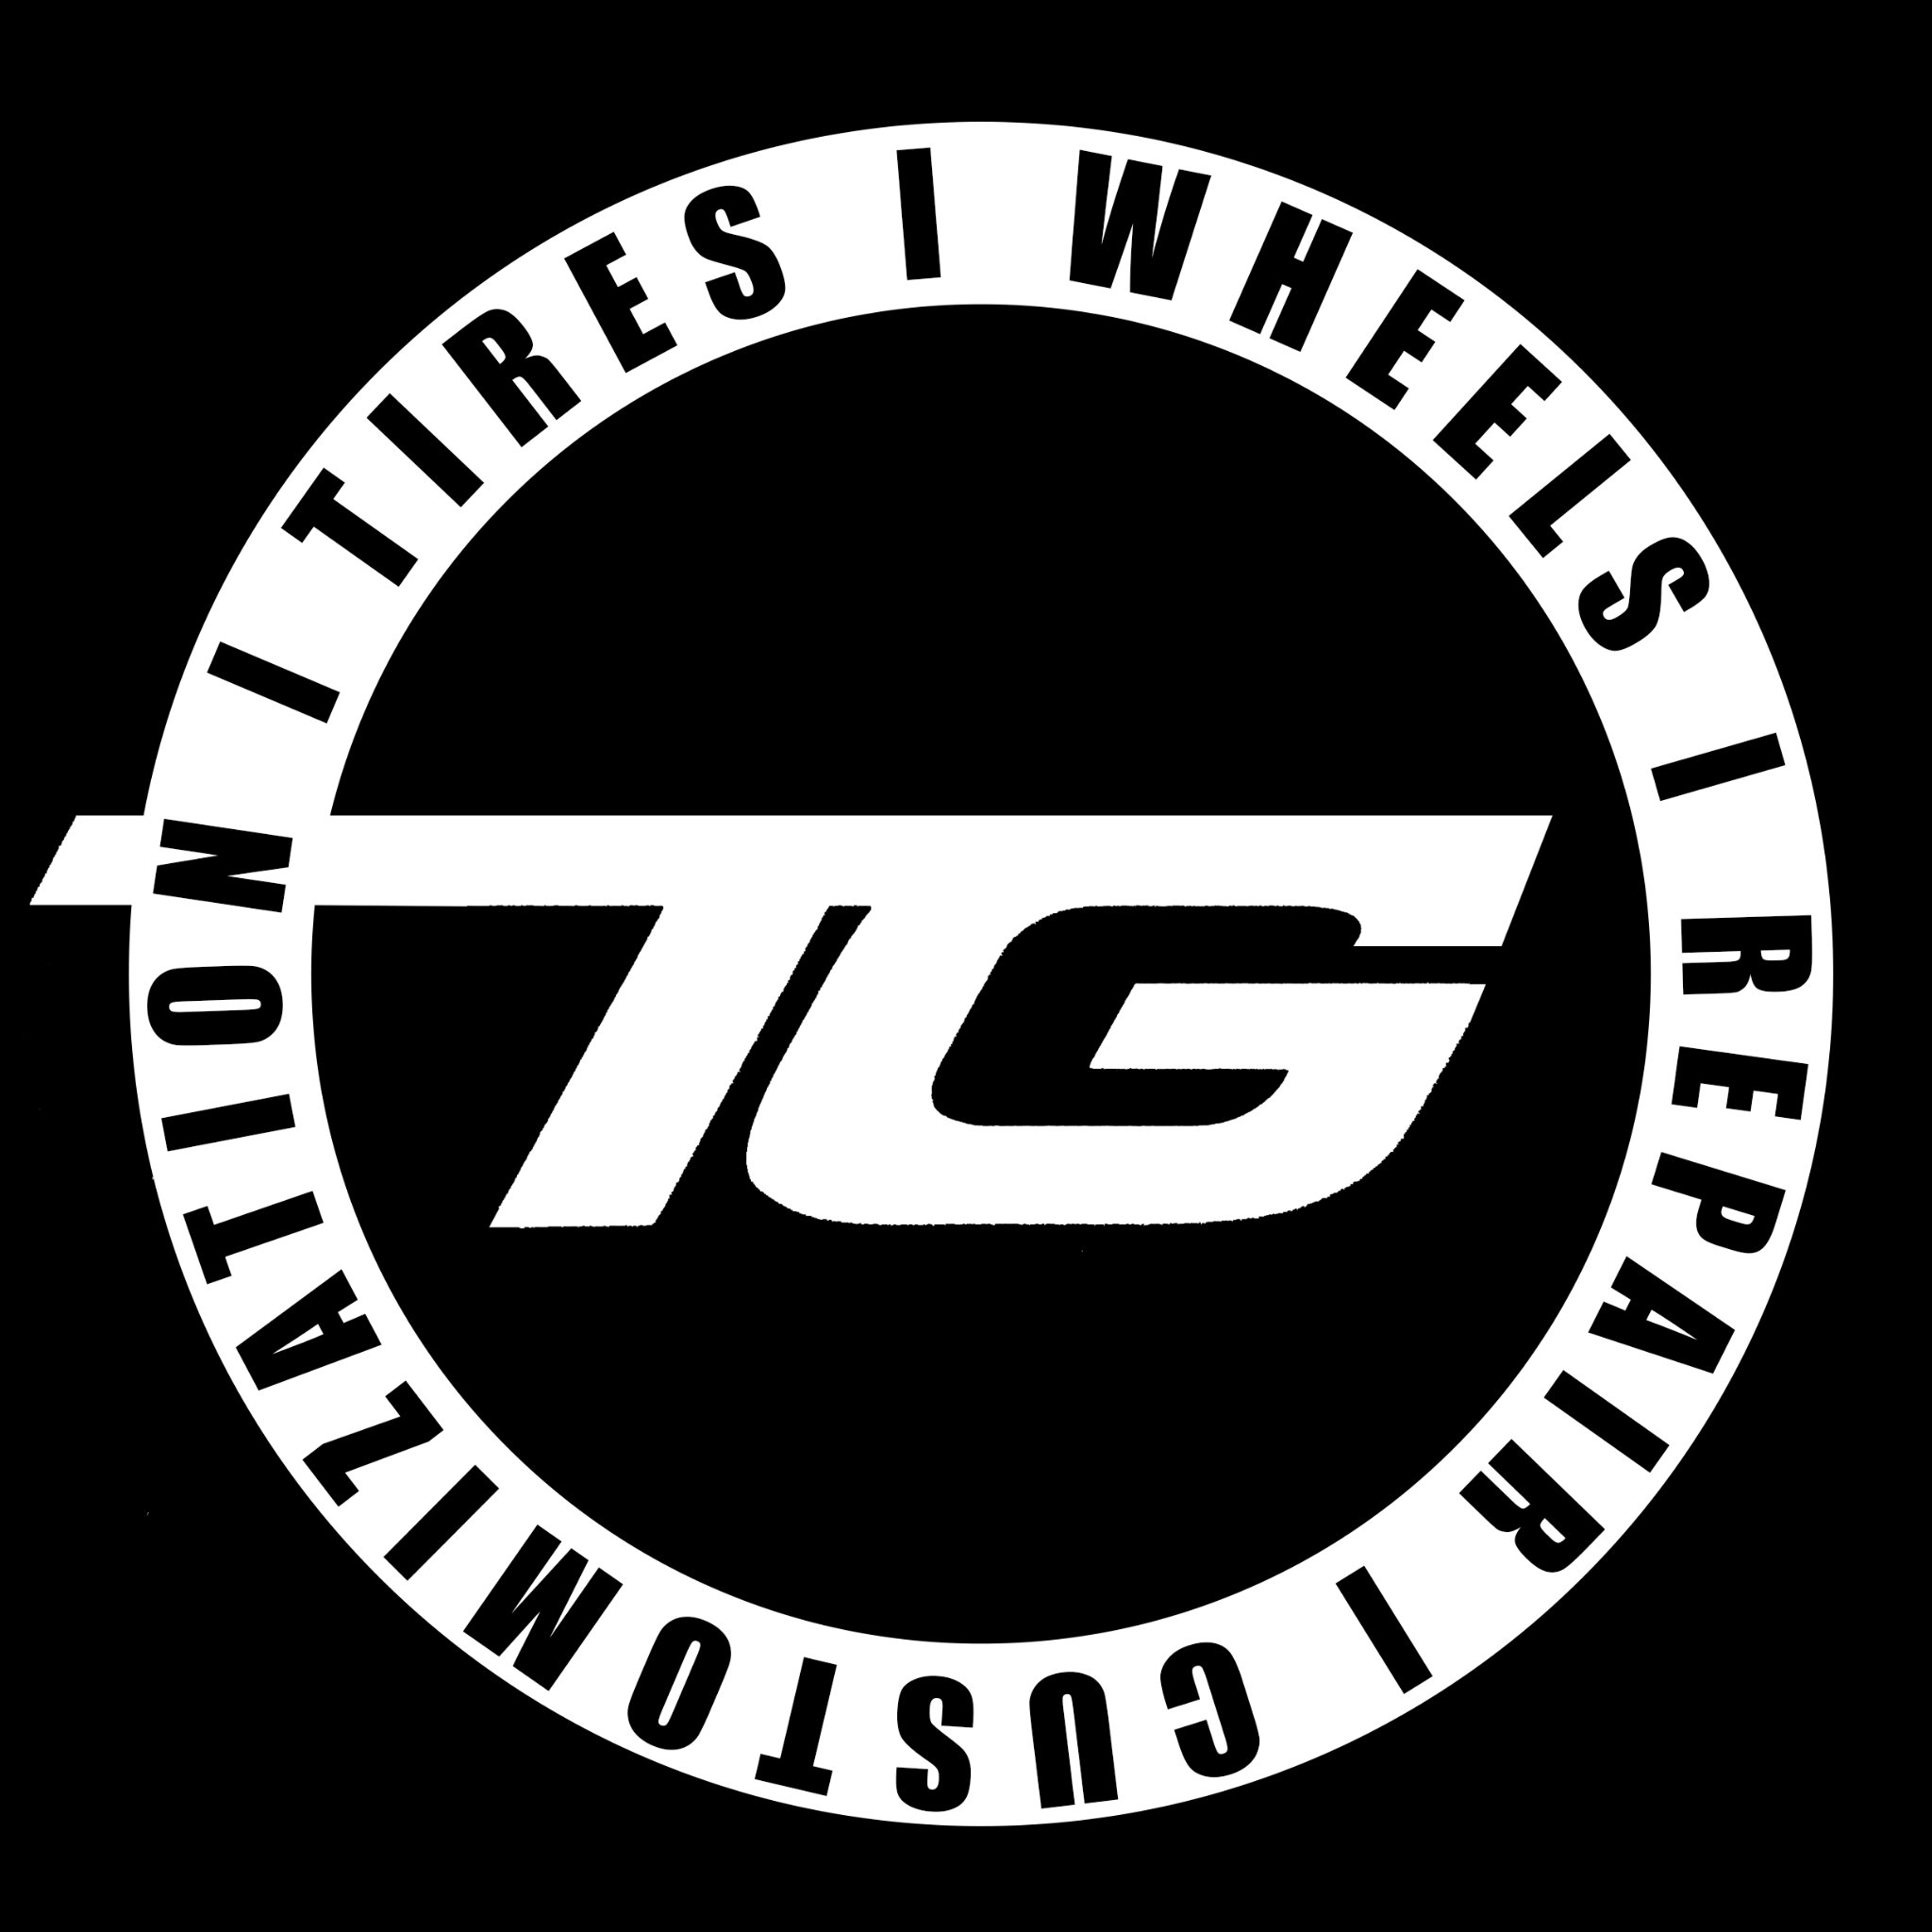 Tire Guys
Automotive Customization Shop
• Tires | Wheels
• Repairs | Customization
• Lowering | Leveling | Lifting
• Ceramic Coating
• Financing Available